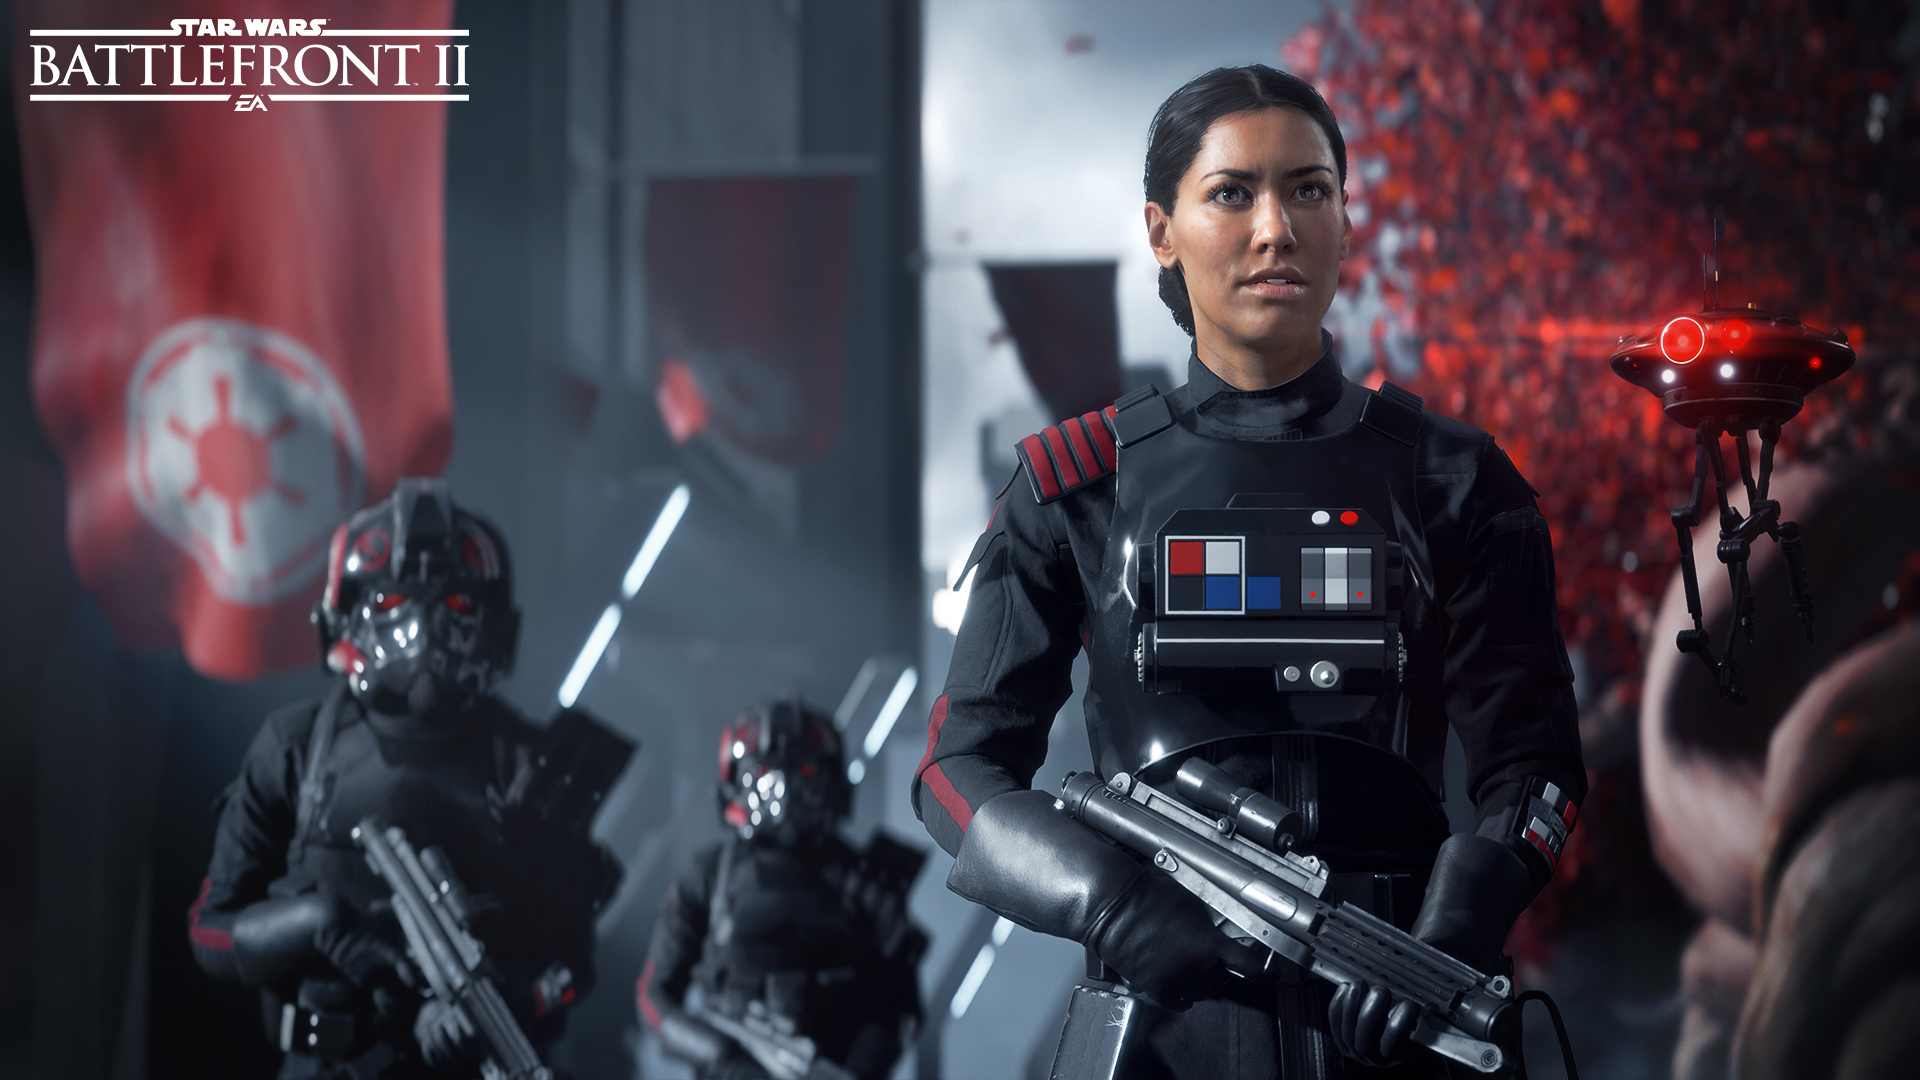 Star Wars: Battlefront II sees weak physical sales when compared to Battlefront 1